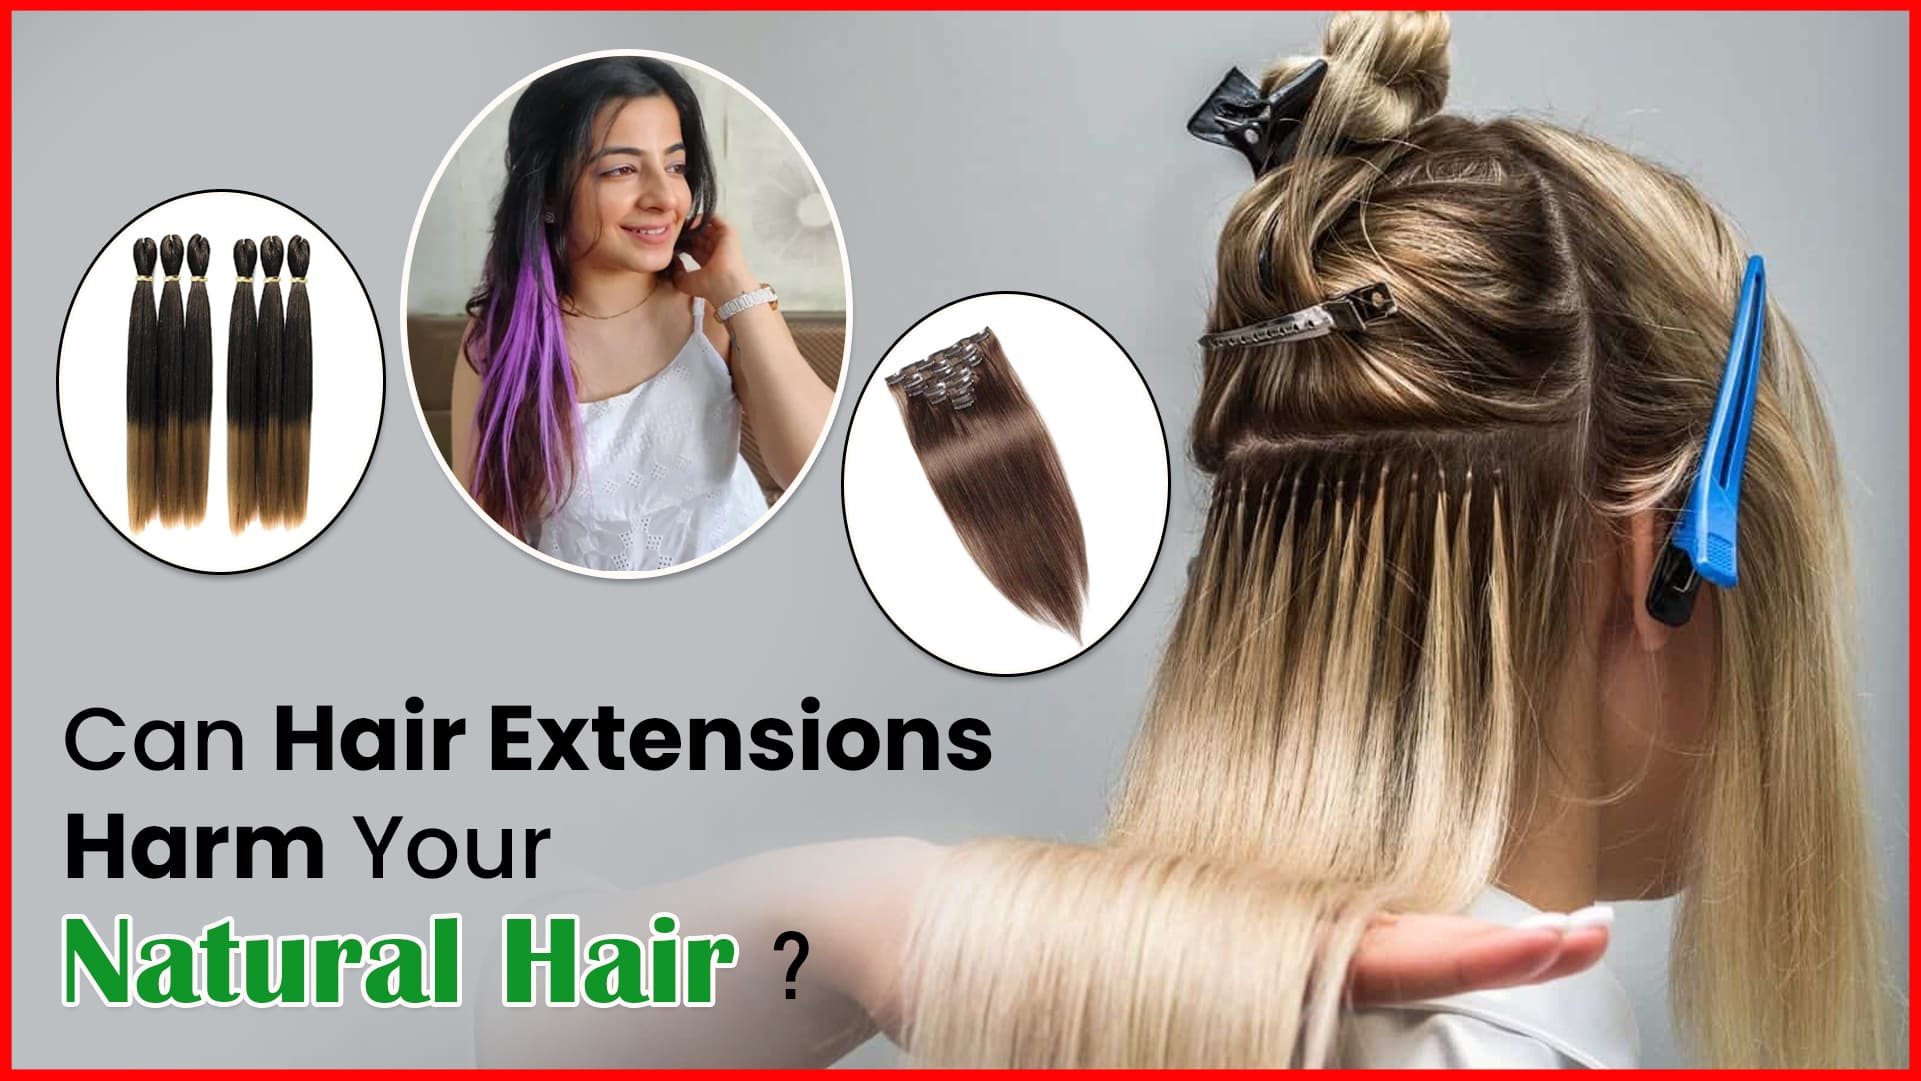 Can 100% human hair extensions harm your natural hair?